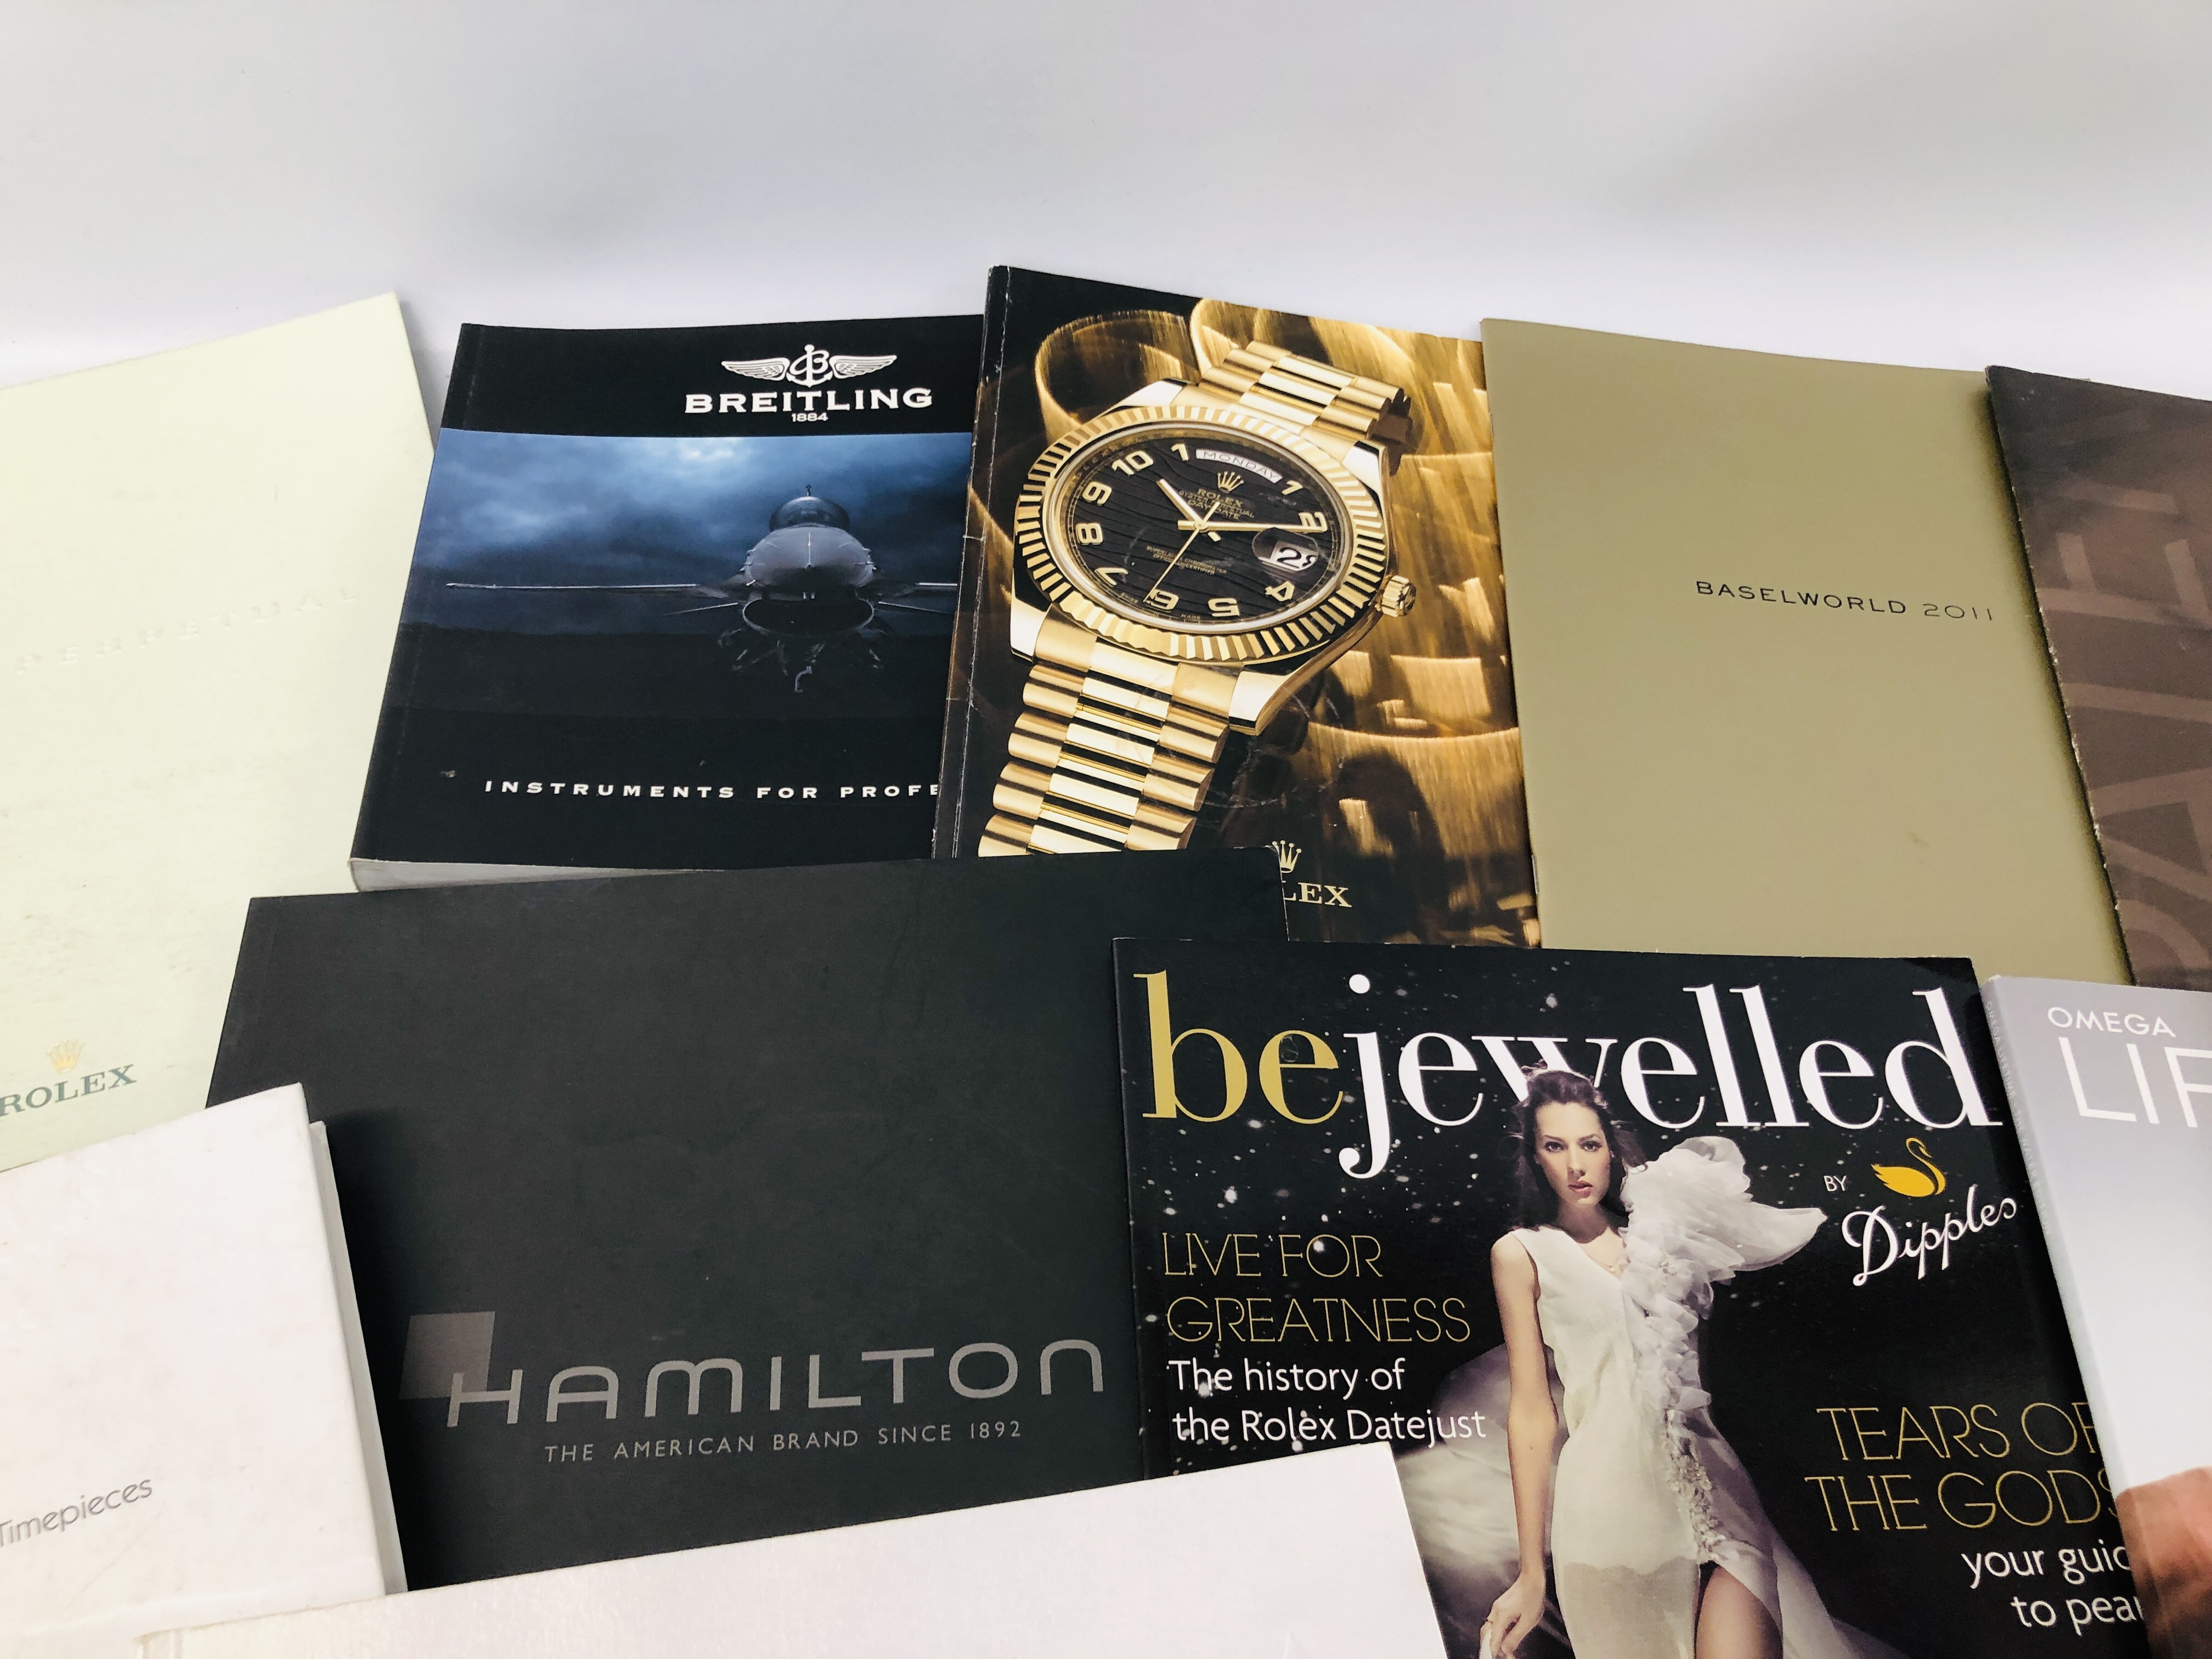 COLLECTION OF WATCH BROCHURES TO INCLUDE JAEGER - LE COULTRE, OMEGA, BREITLING, ROLEX ETC. - Image 4 of 5